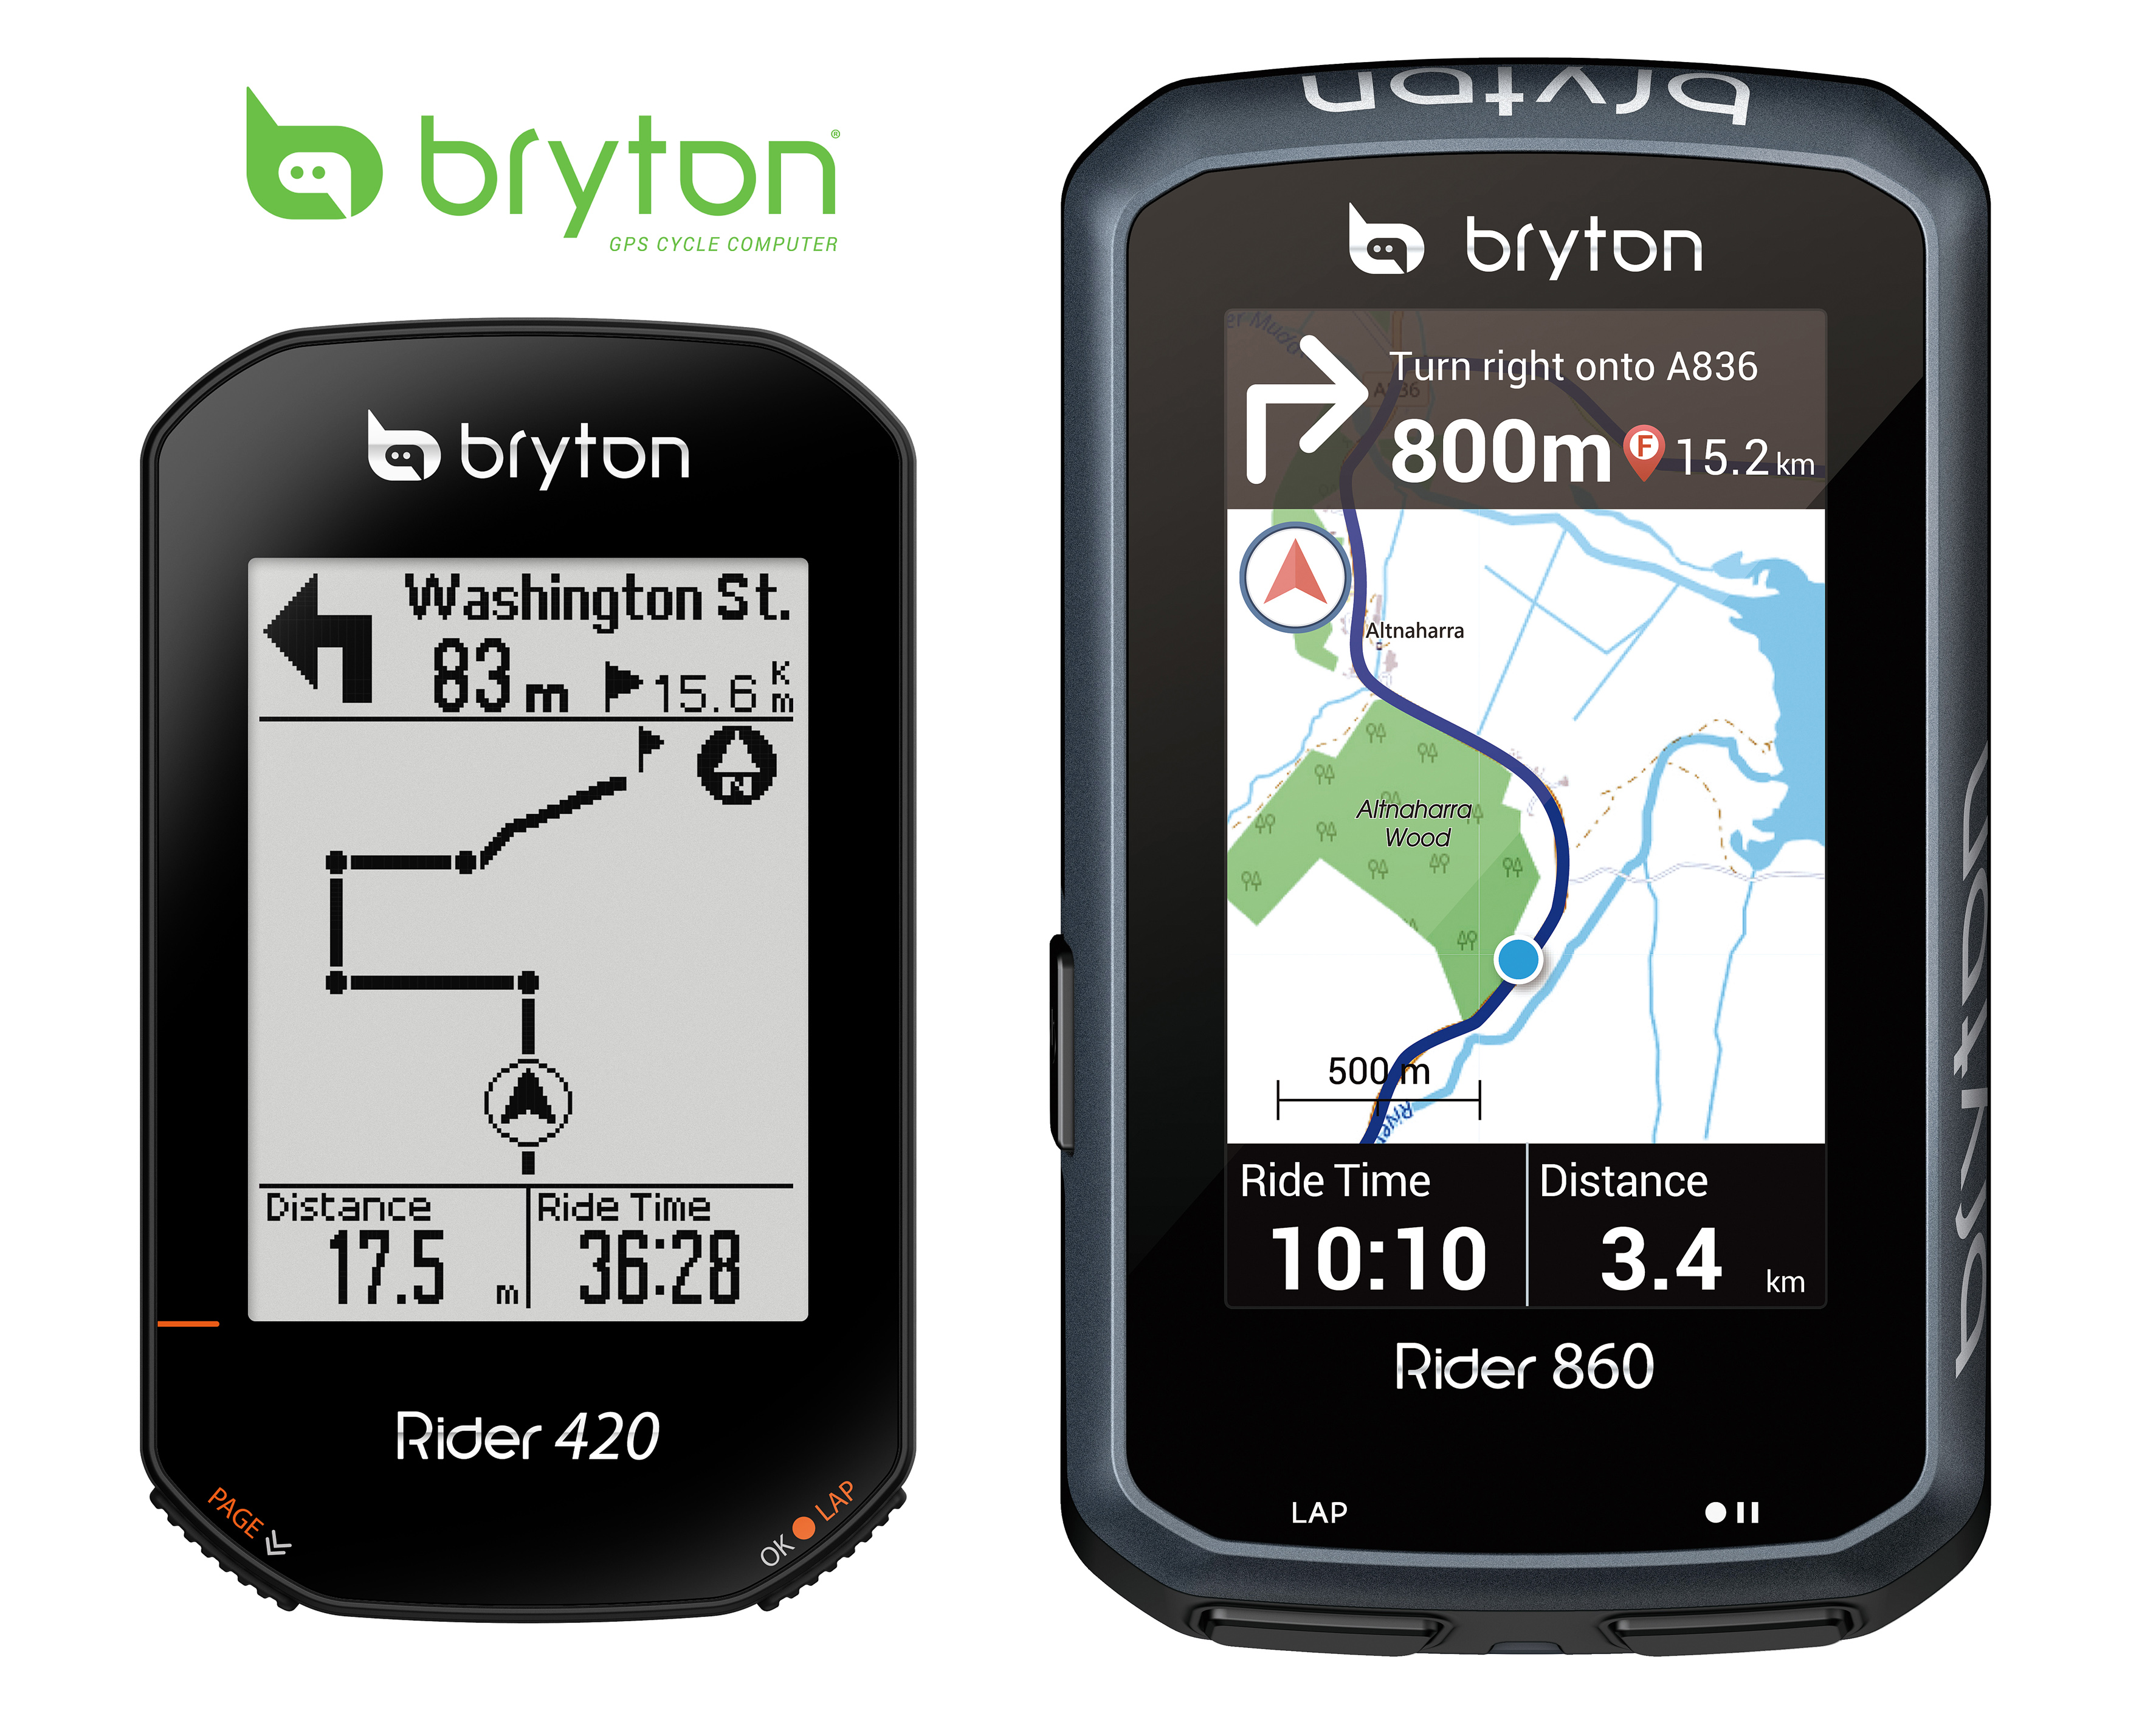 Bryton Rider 860 Announced with specifications